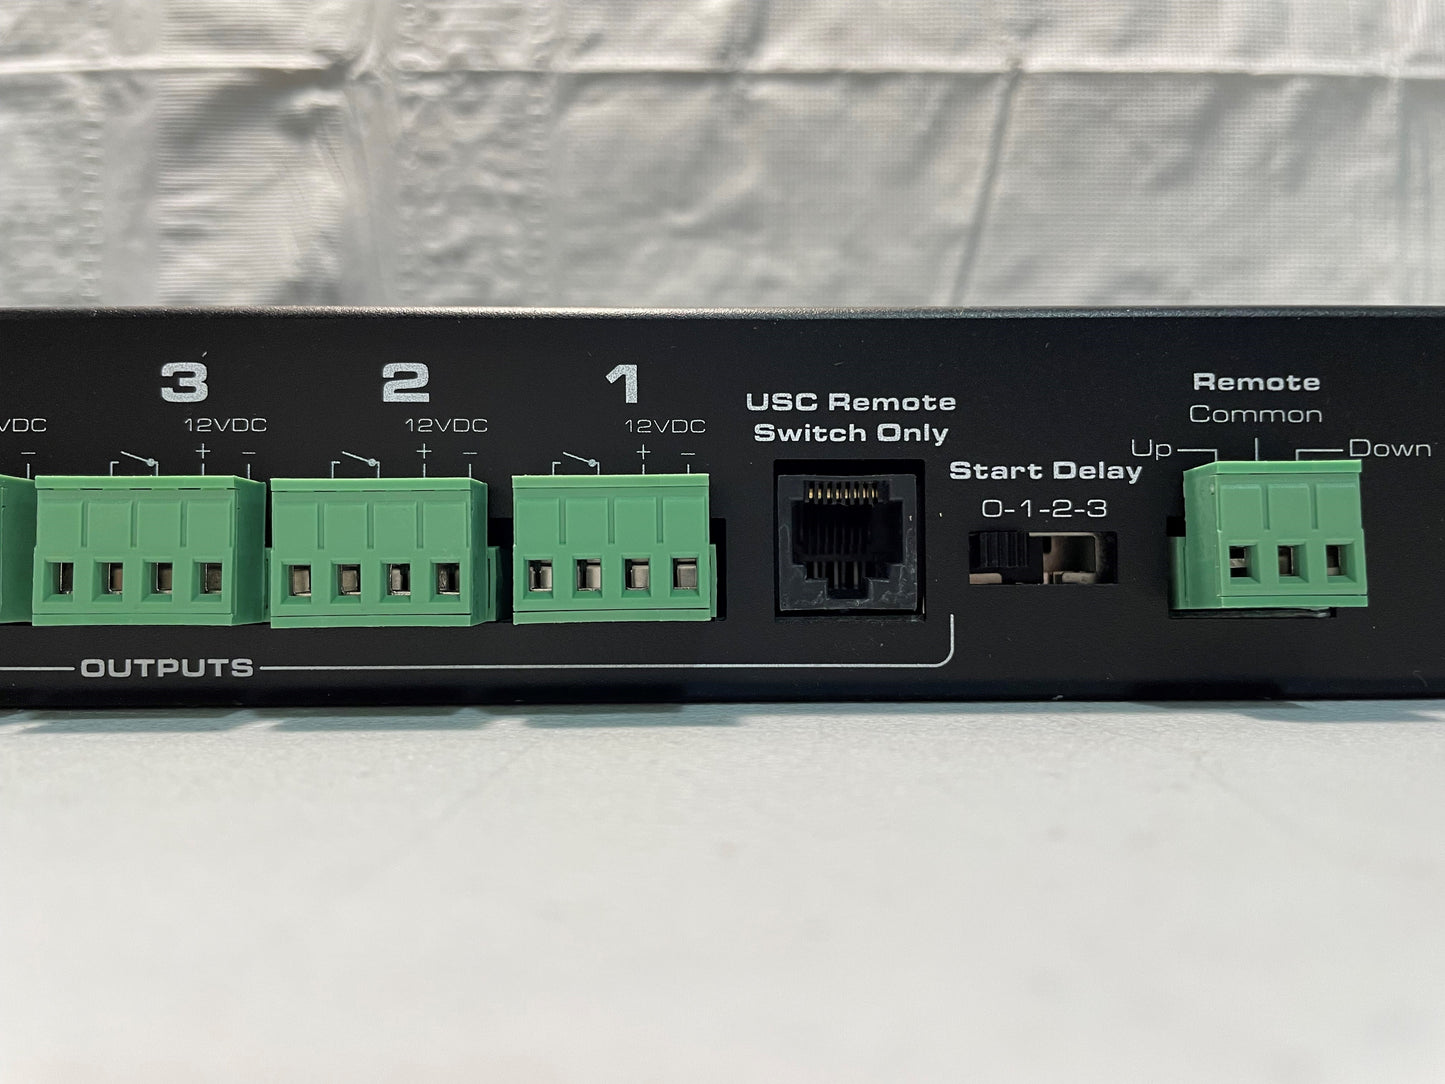 New Middle Atlantic USC-6R Power Sequencer, Universal Sequencing Controller for Sale. We Sell Professional Audio Equipment. Audio Systems, Amplifiers, Consoles, Mixers, Electronics, Entertainment, Sound, Live.'